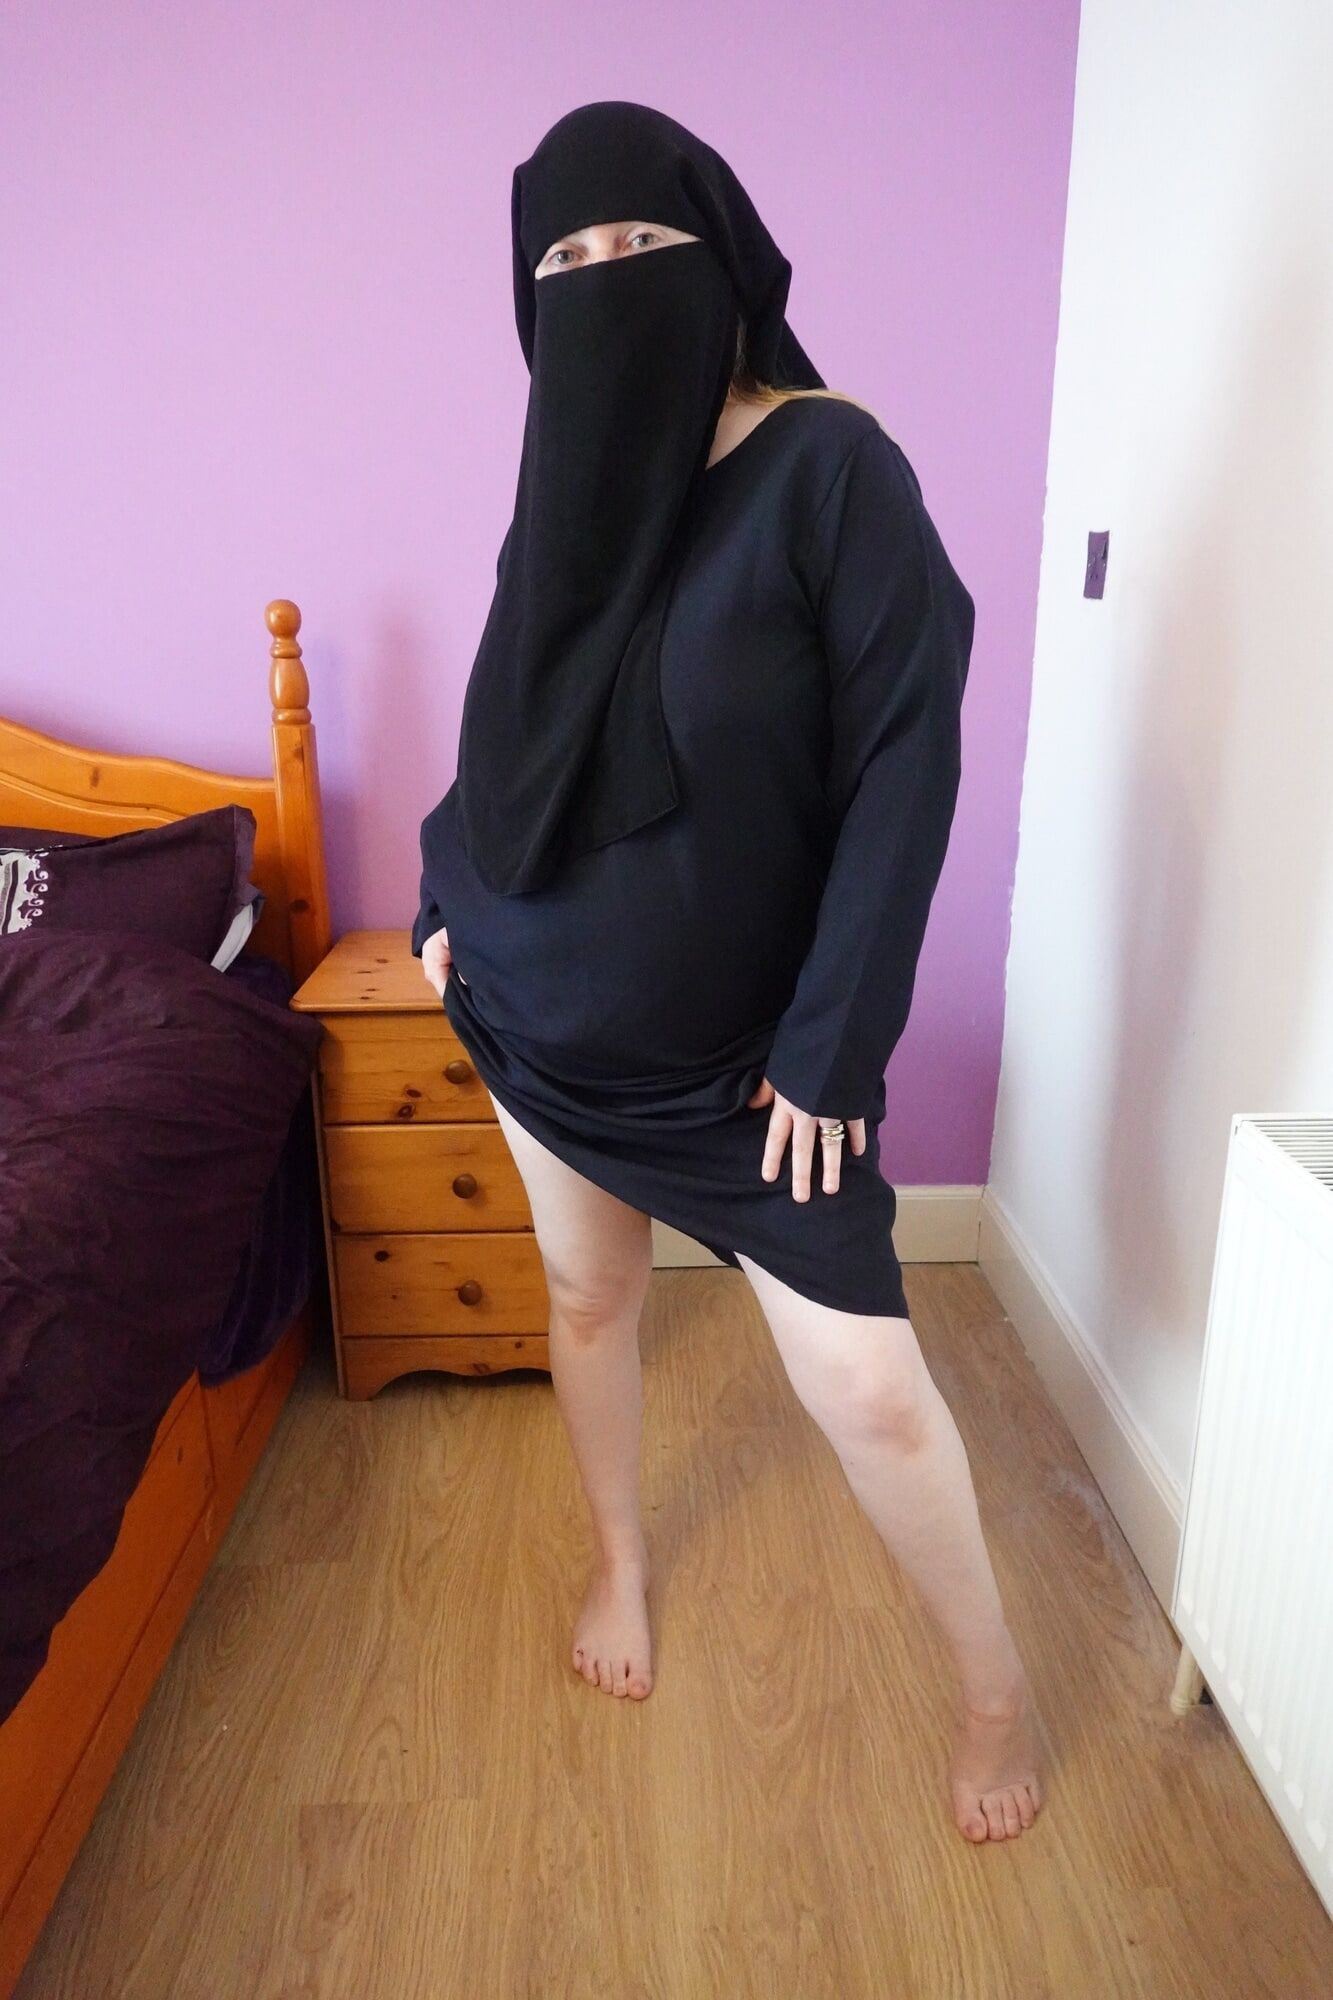 wife wearing Burqa with Niqab naked underneath #8